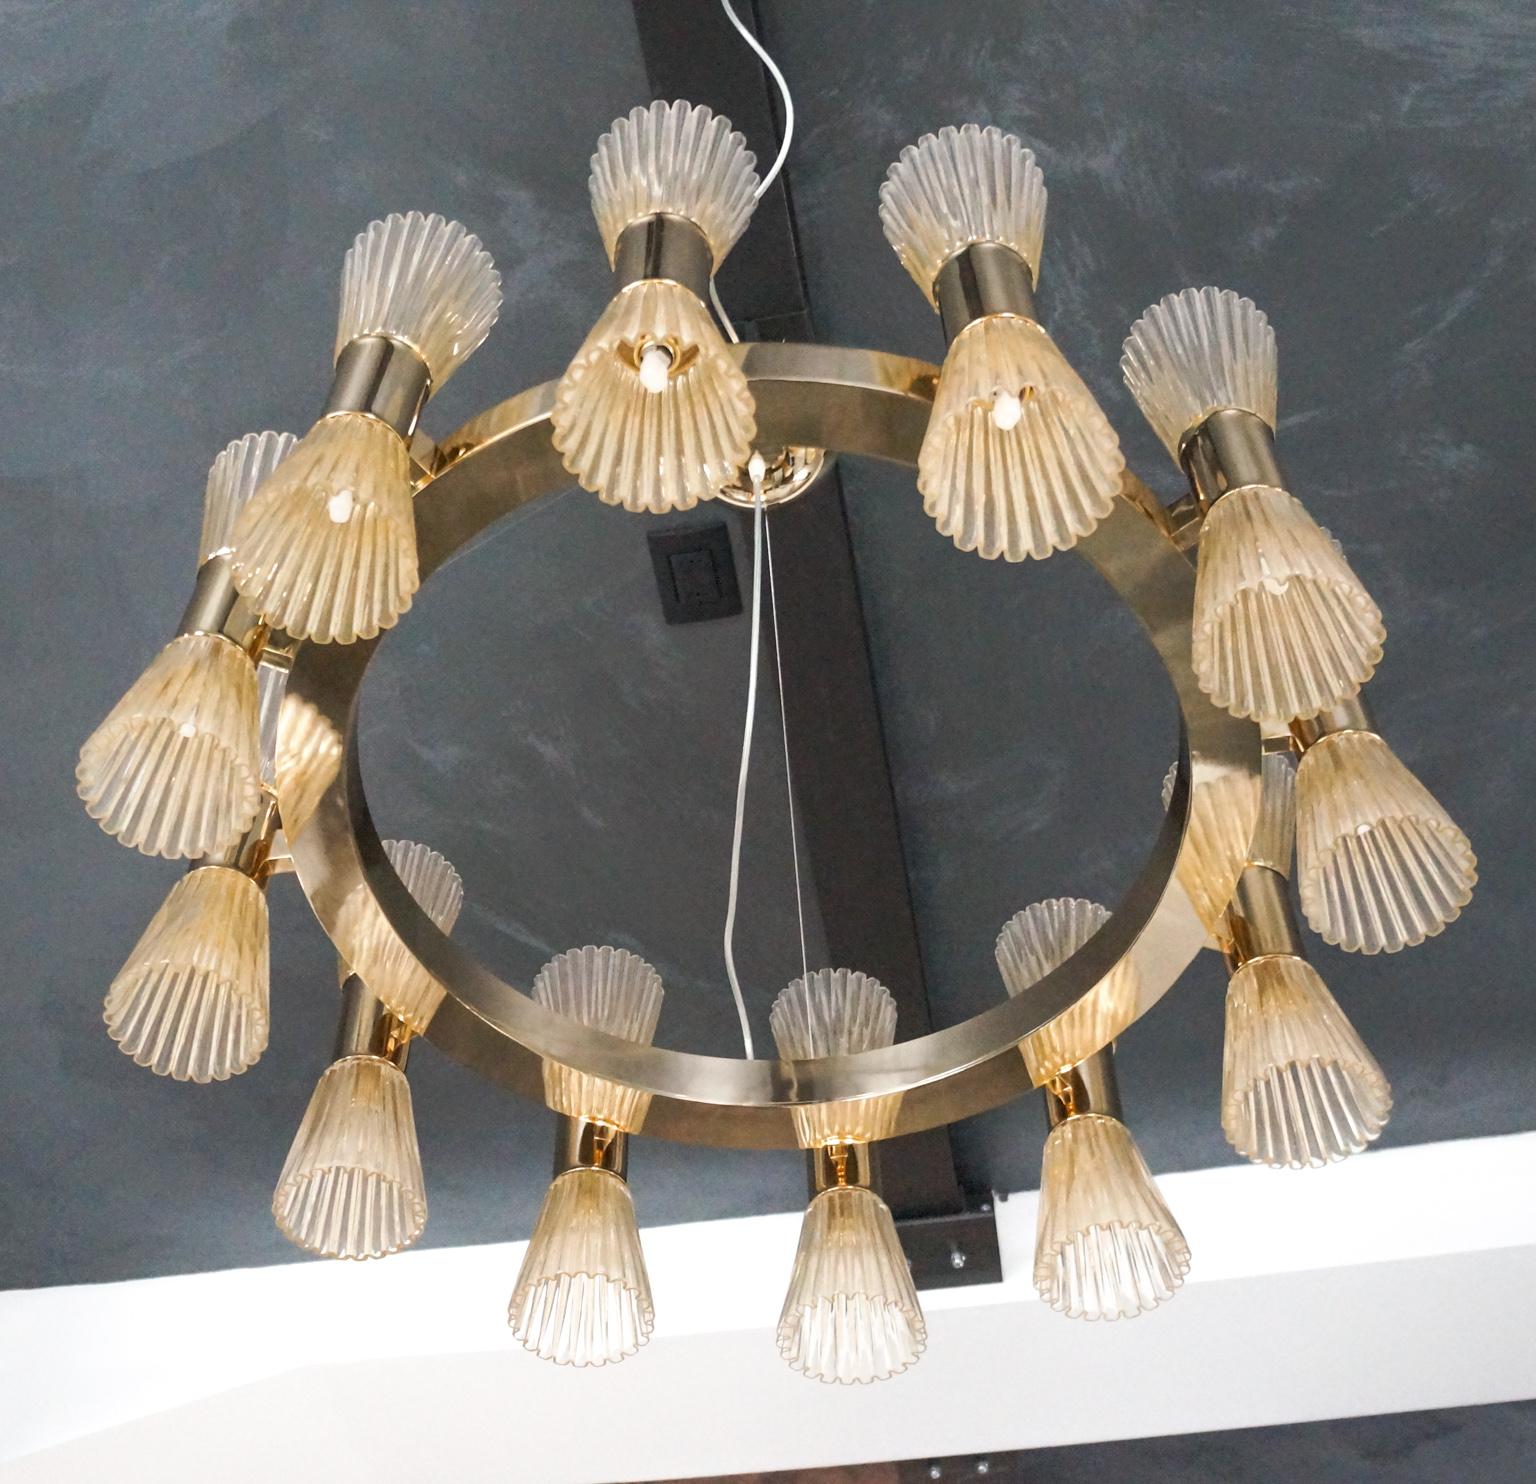 Dona Furnace Mid-Century Modern Gold Murano Glass Chandelier Round, 1998 For Sale 5